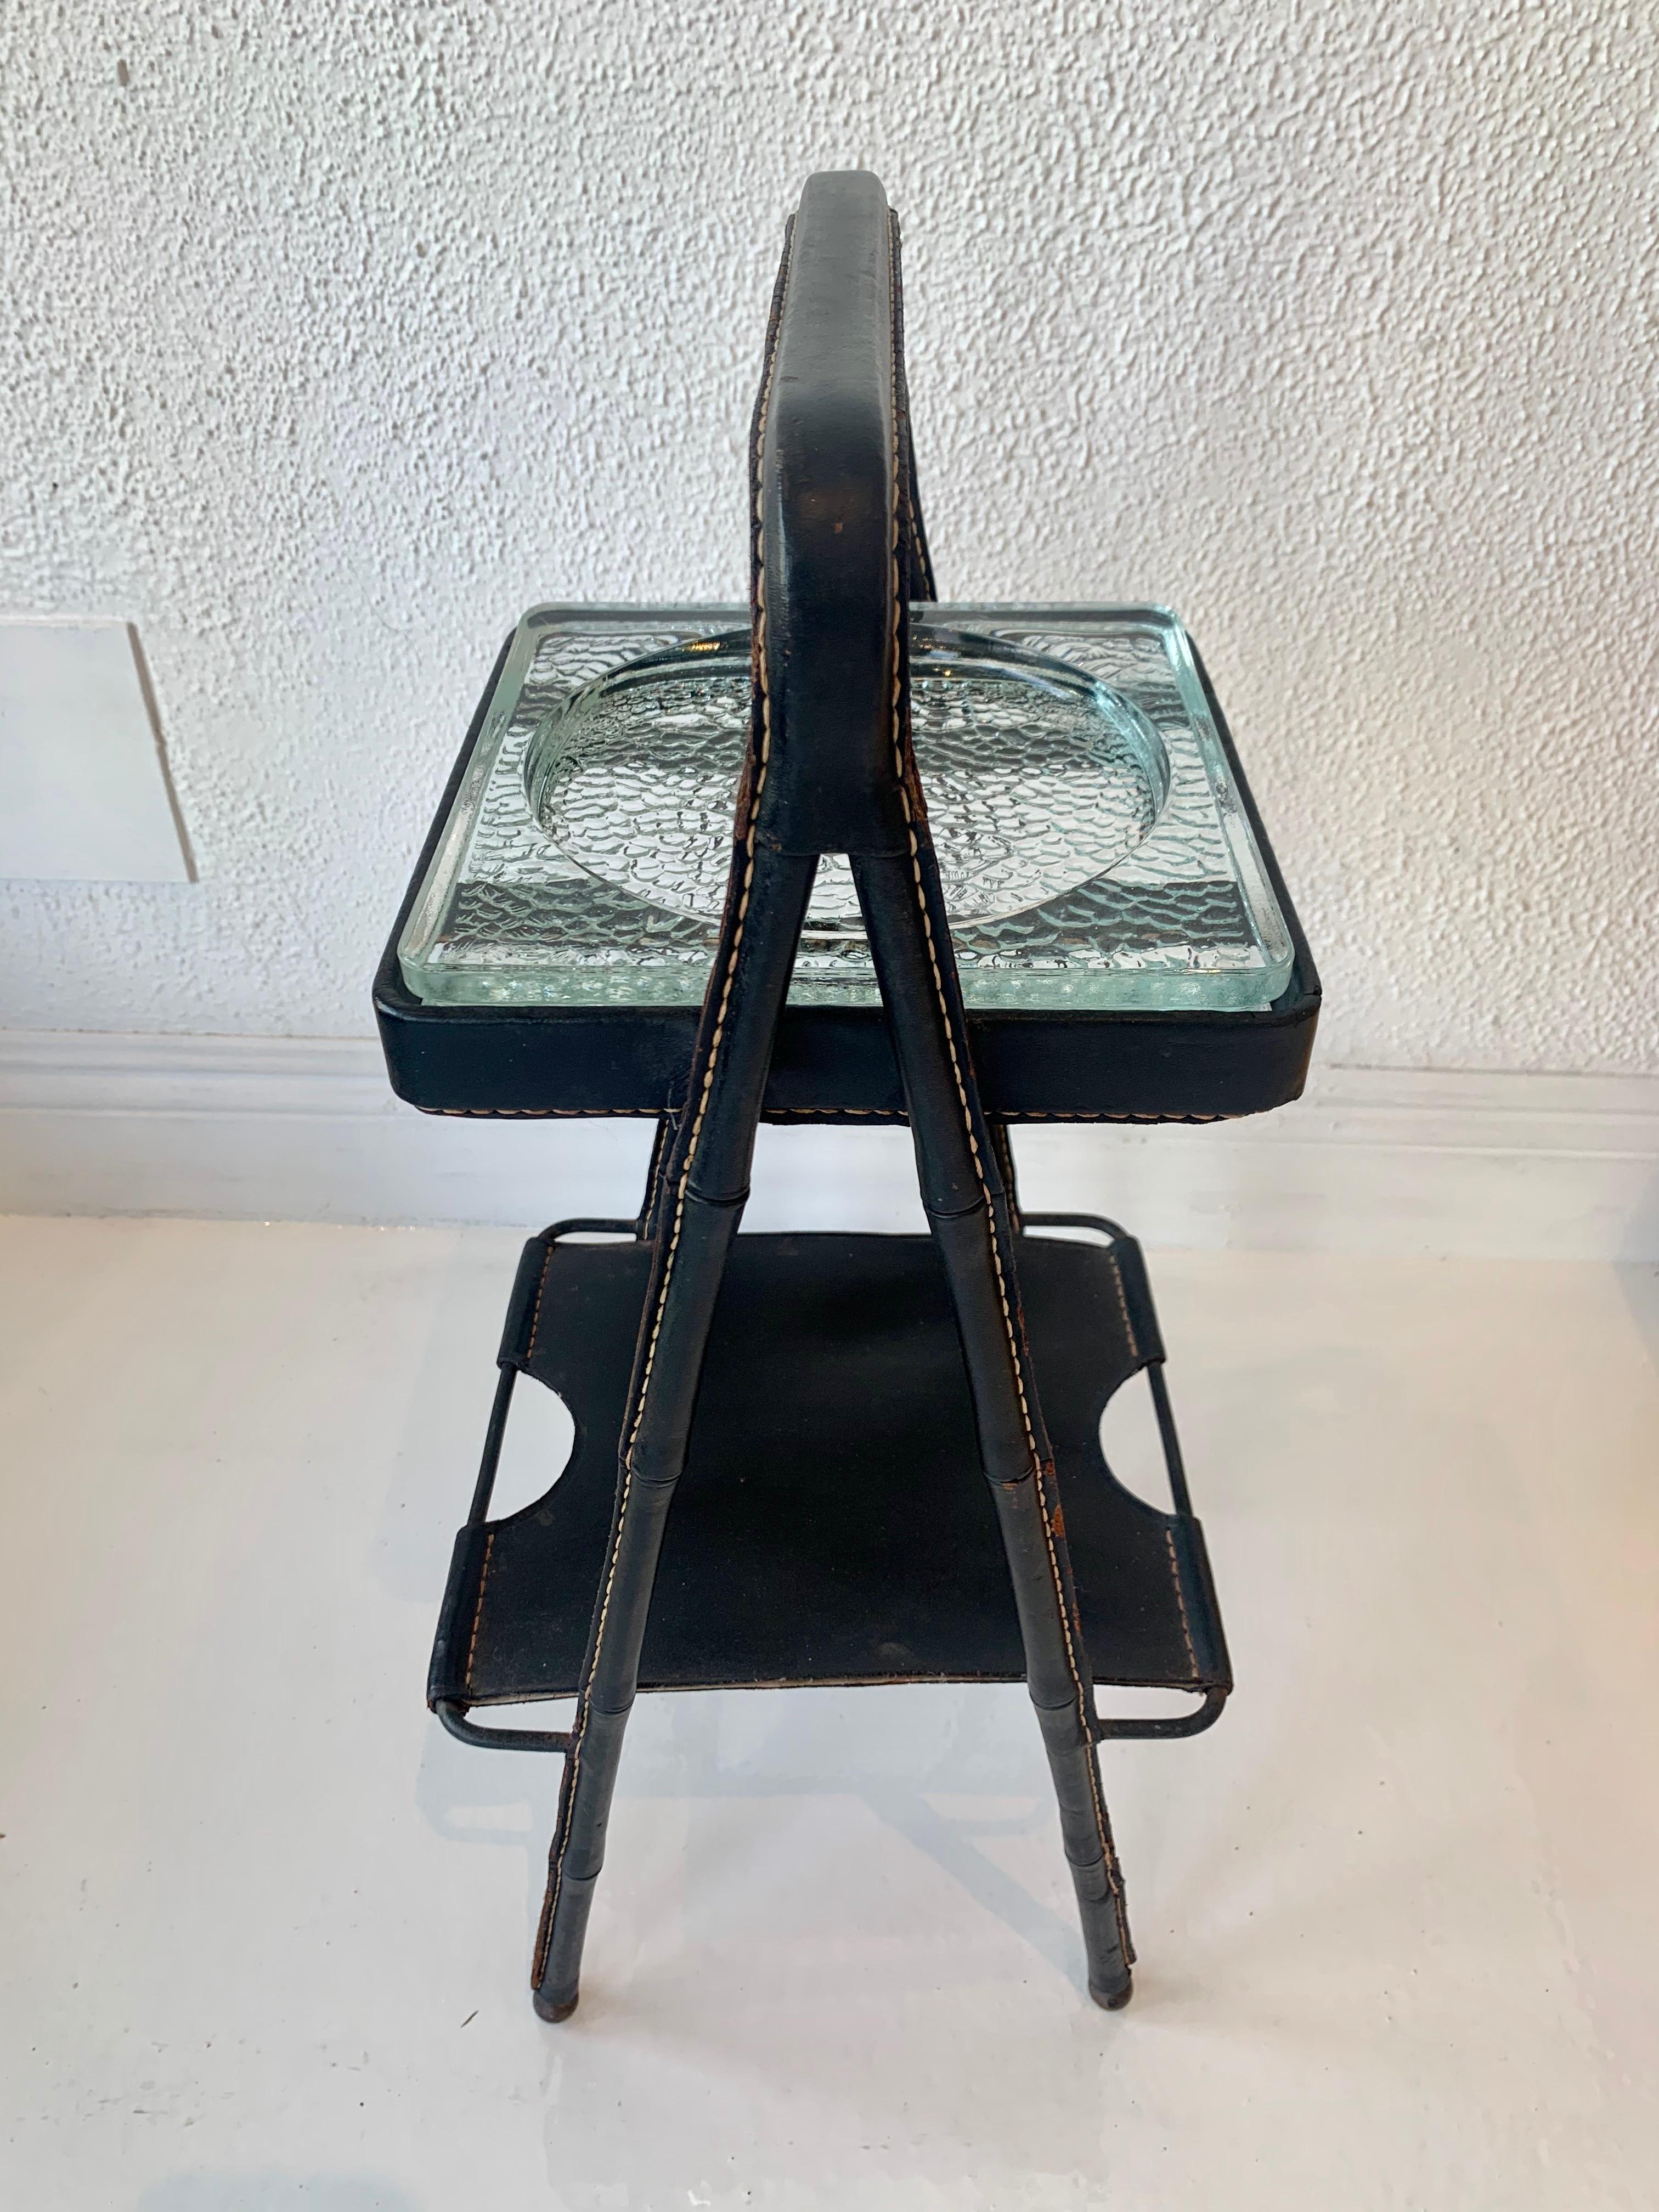 Mid-20th Century Jacques Adnet Leather Side Table or Catchall, 1950s France